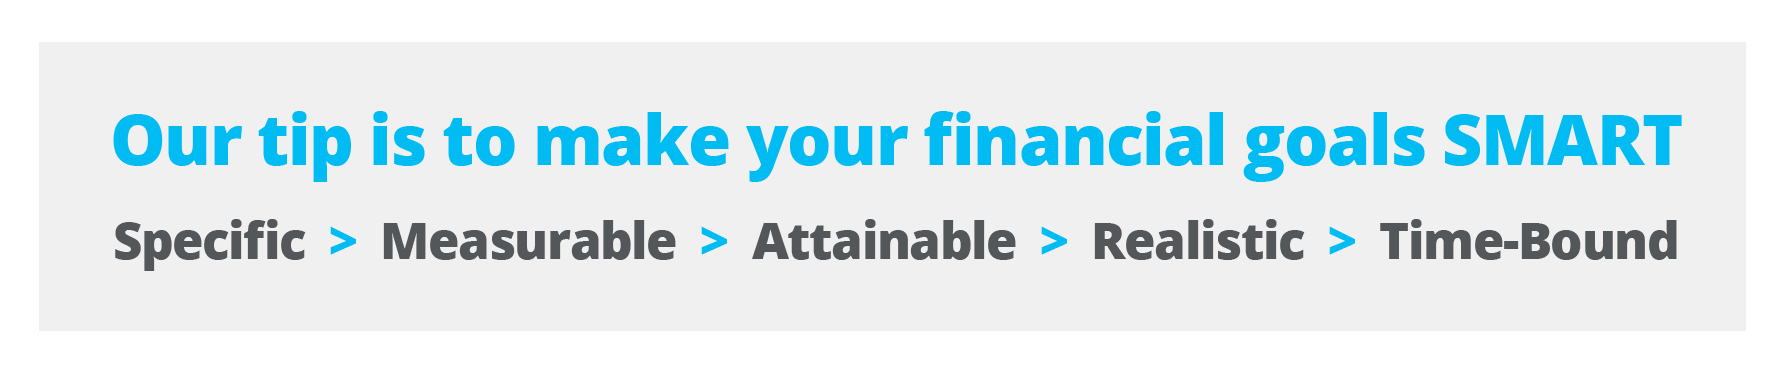 Our tip is to make your financial goals SMART: Specific, Measurable, Attainable, Relevant and Time-Bound.